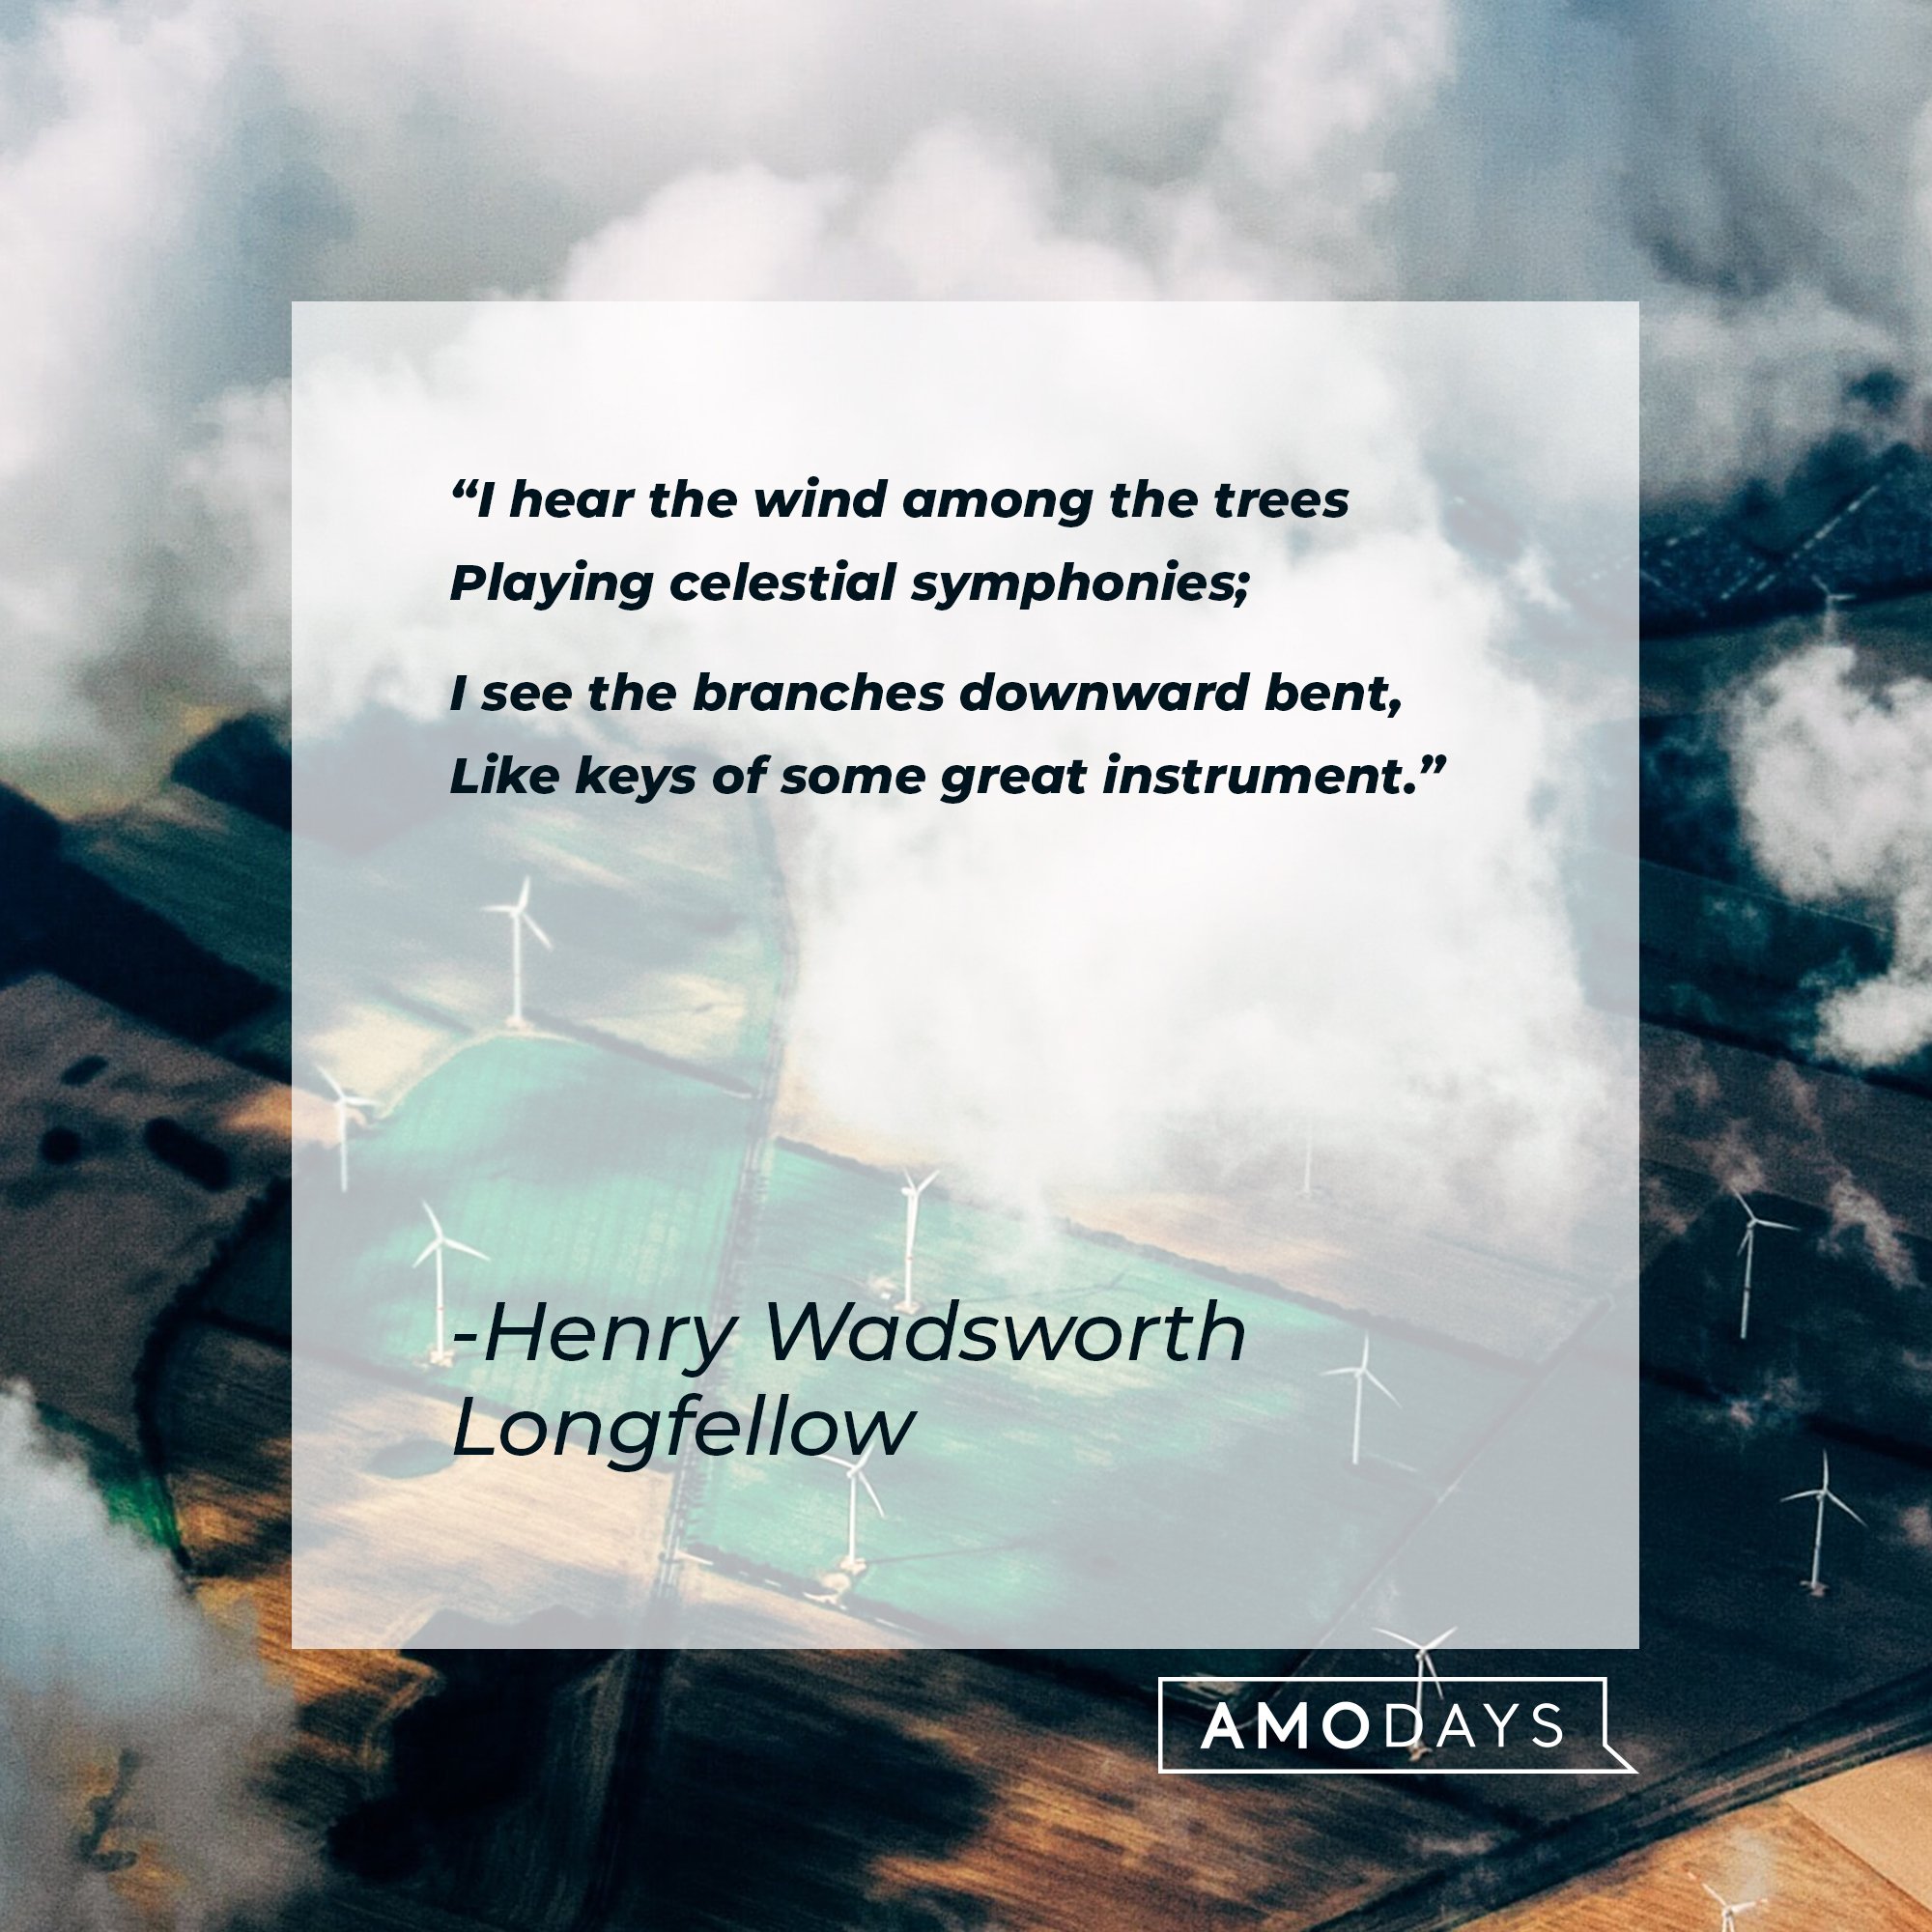 Henry Wadsworth Longfellow's quote: "I hear the wind among the trees Playing the celestial symphonies; I see the branches downward bent, Like keys of some great instrument." | Image: AmoDays